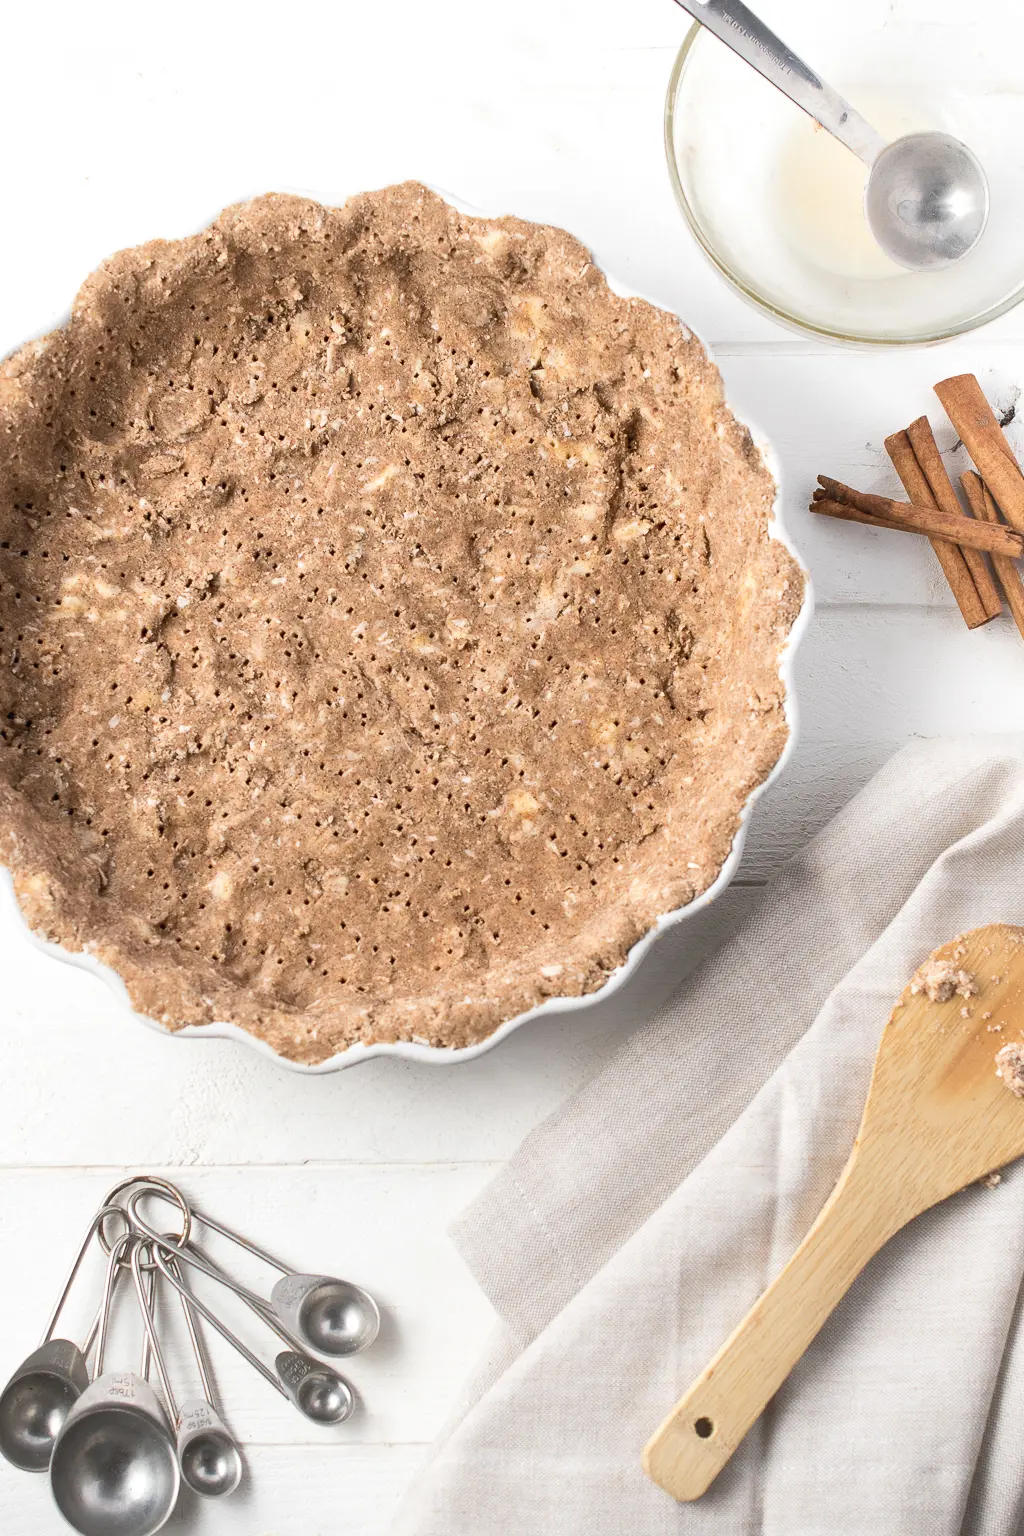 Baked keto pie crust in a pan on a white background, surrounded by cinnamon sticks, measuring spoons, and a wooden spoon which is resting on a napkin.